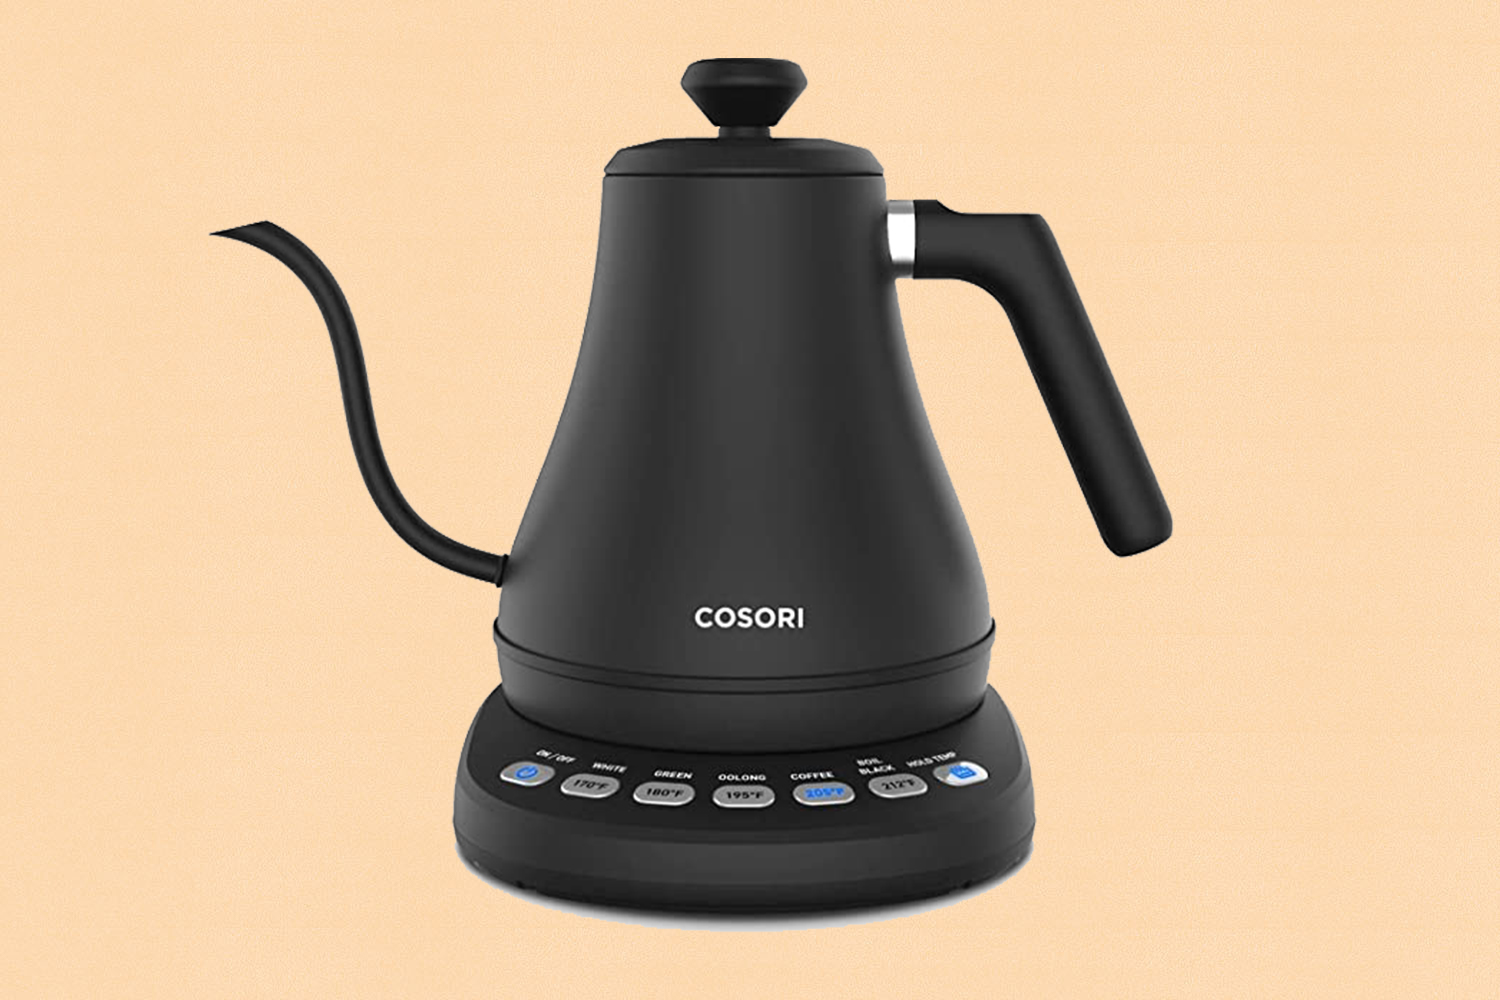 Cosori Electric Gooseneck Kettle for Tea and Coffee